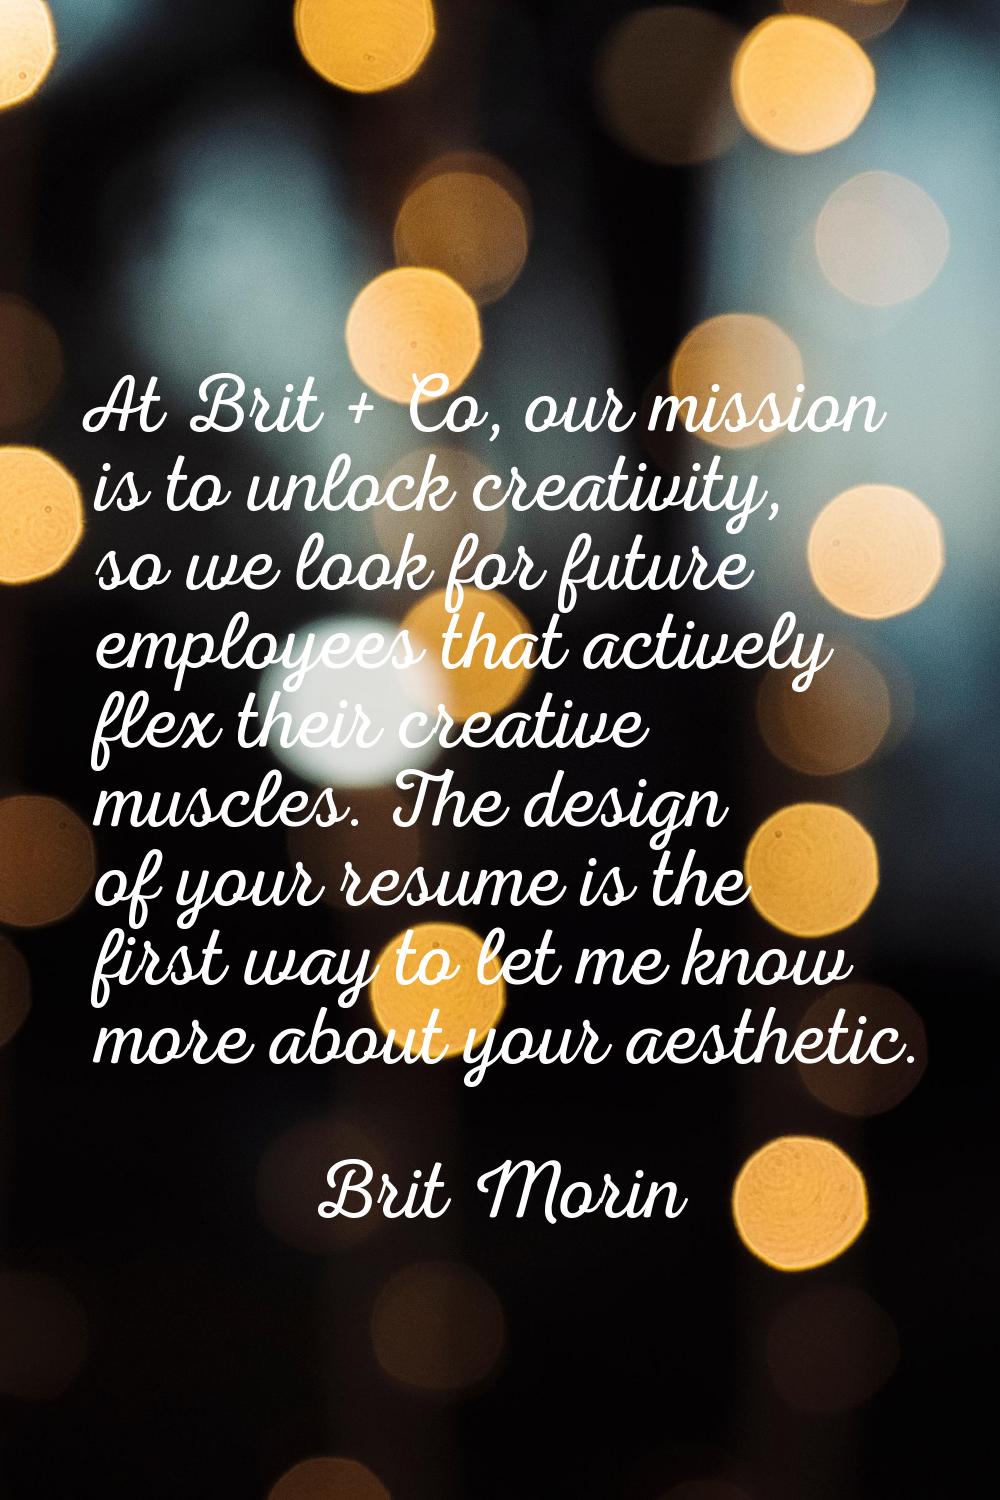 At Brit + Co, our mission is to unlock creativity, so we look for future employees that actively fl